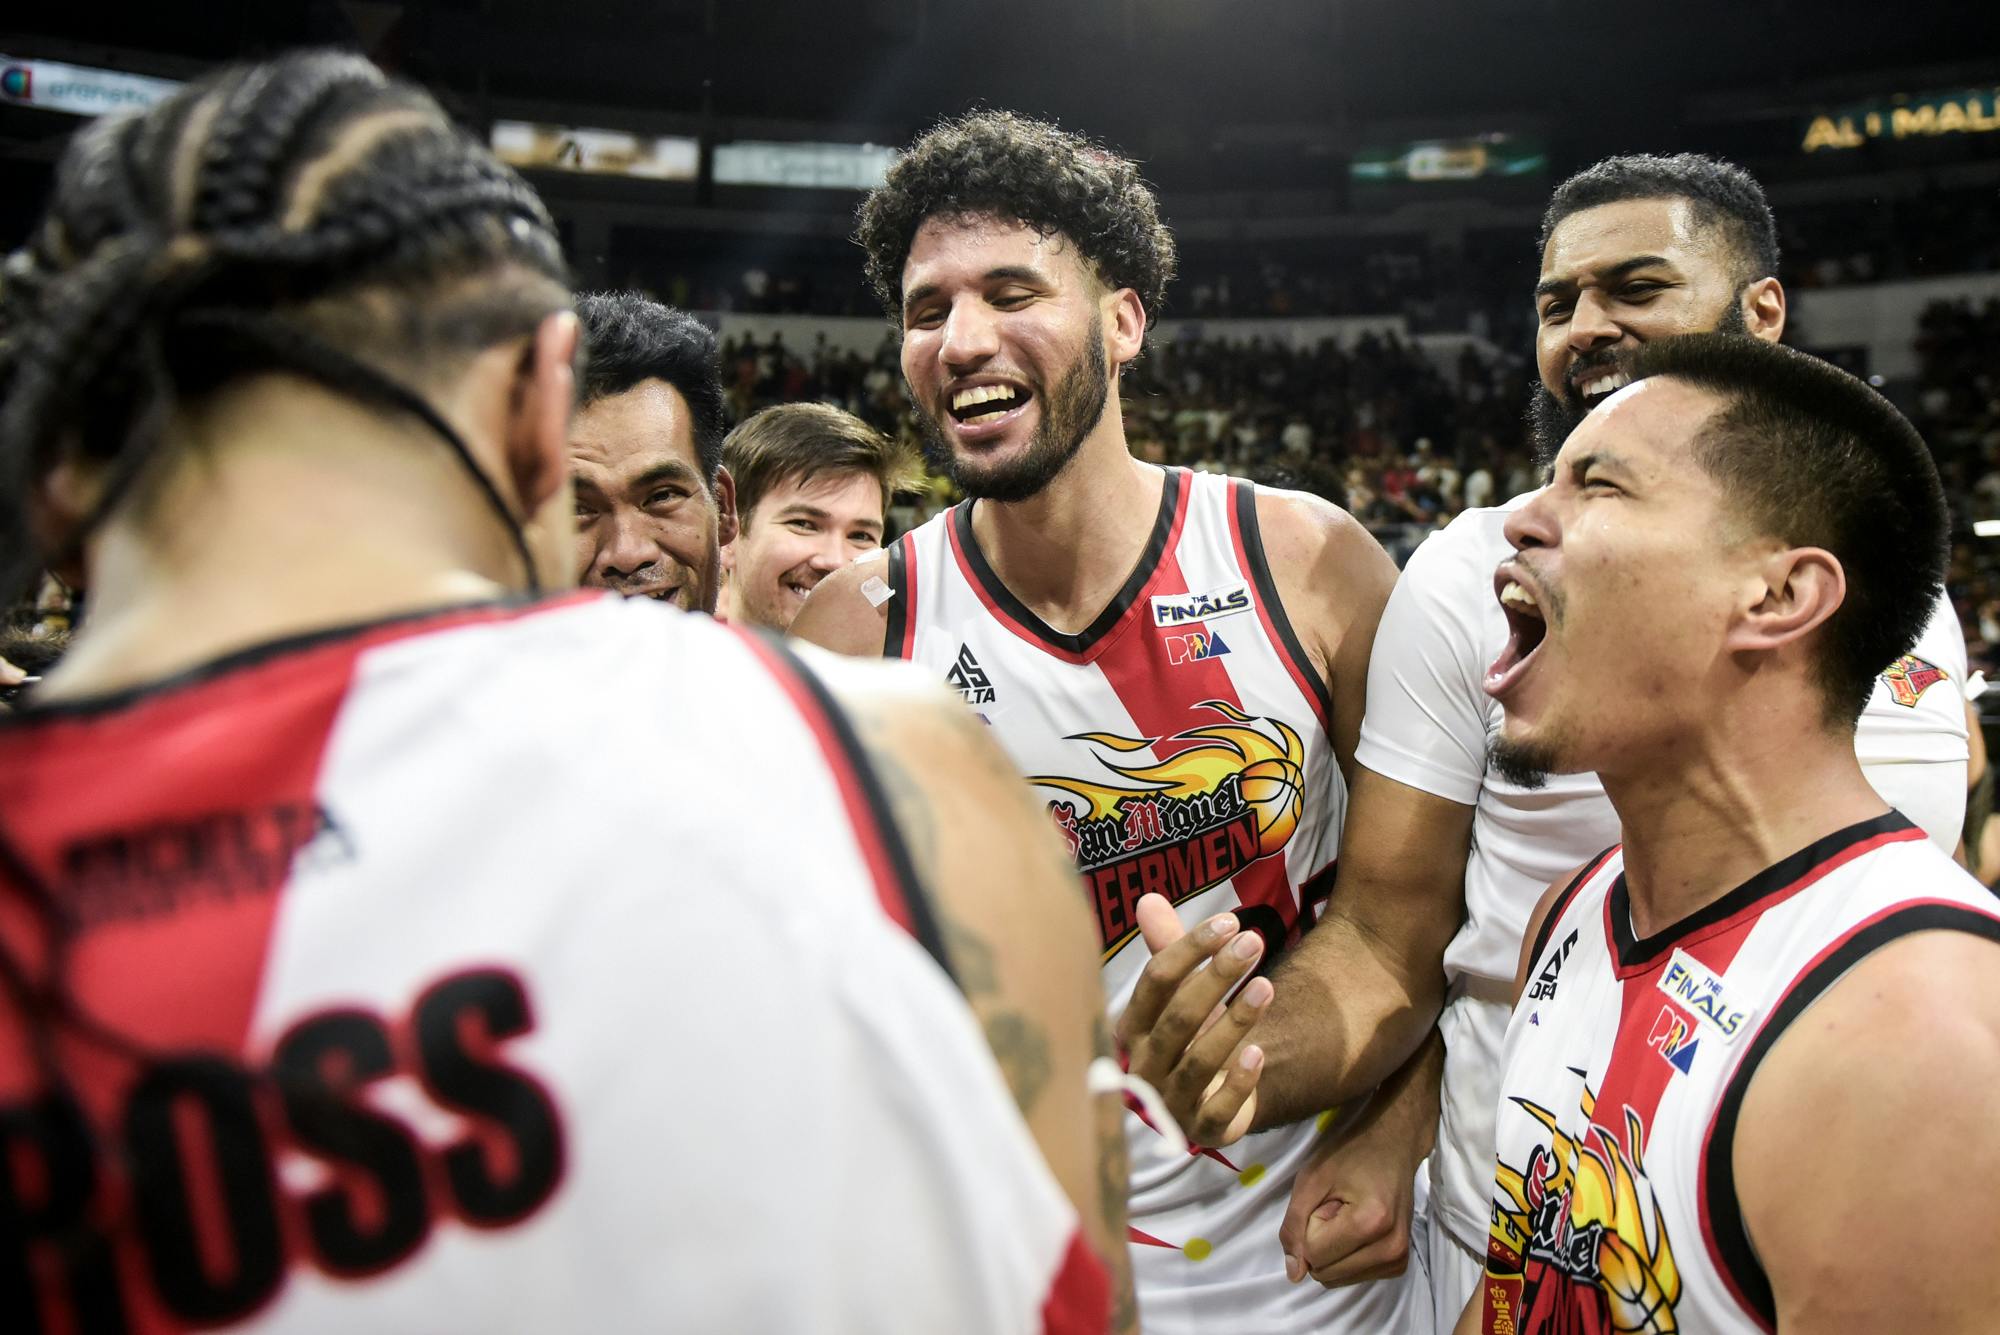 PBA: Bennie Boatwright keen for another tour of duty with San Miguel